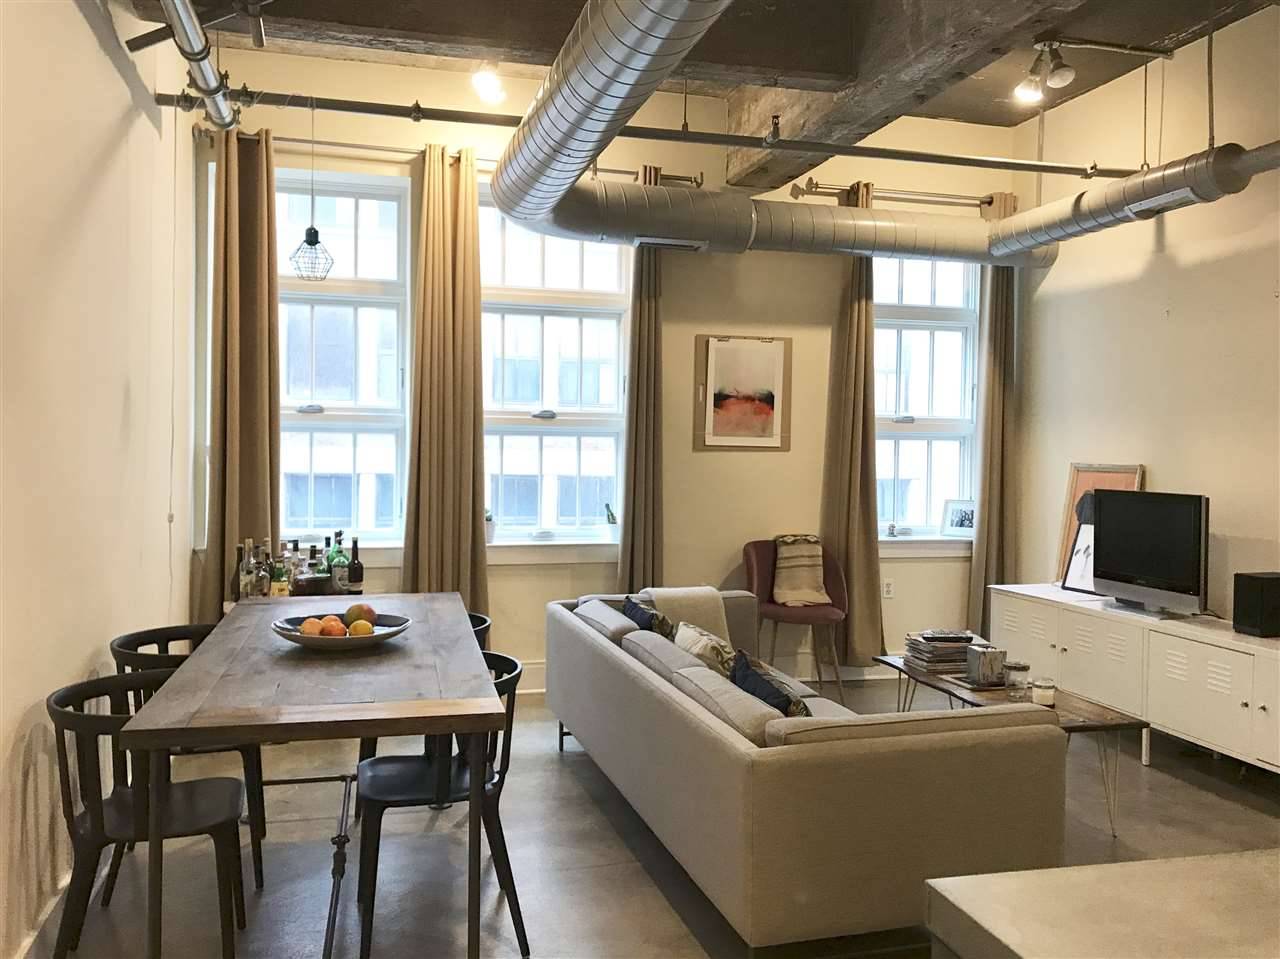 Don’t miss this opportunity to own in a unique true loft space in the heart of downtown Jersey City’s Powerhouse Arts District